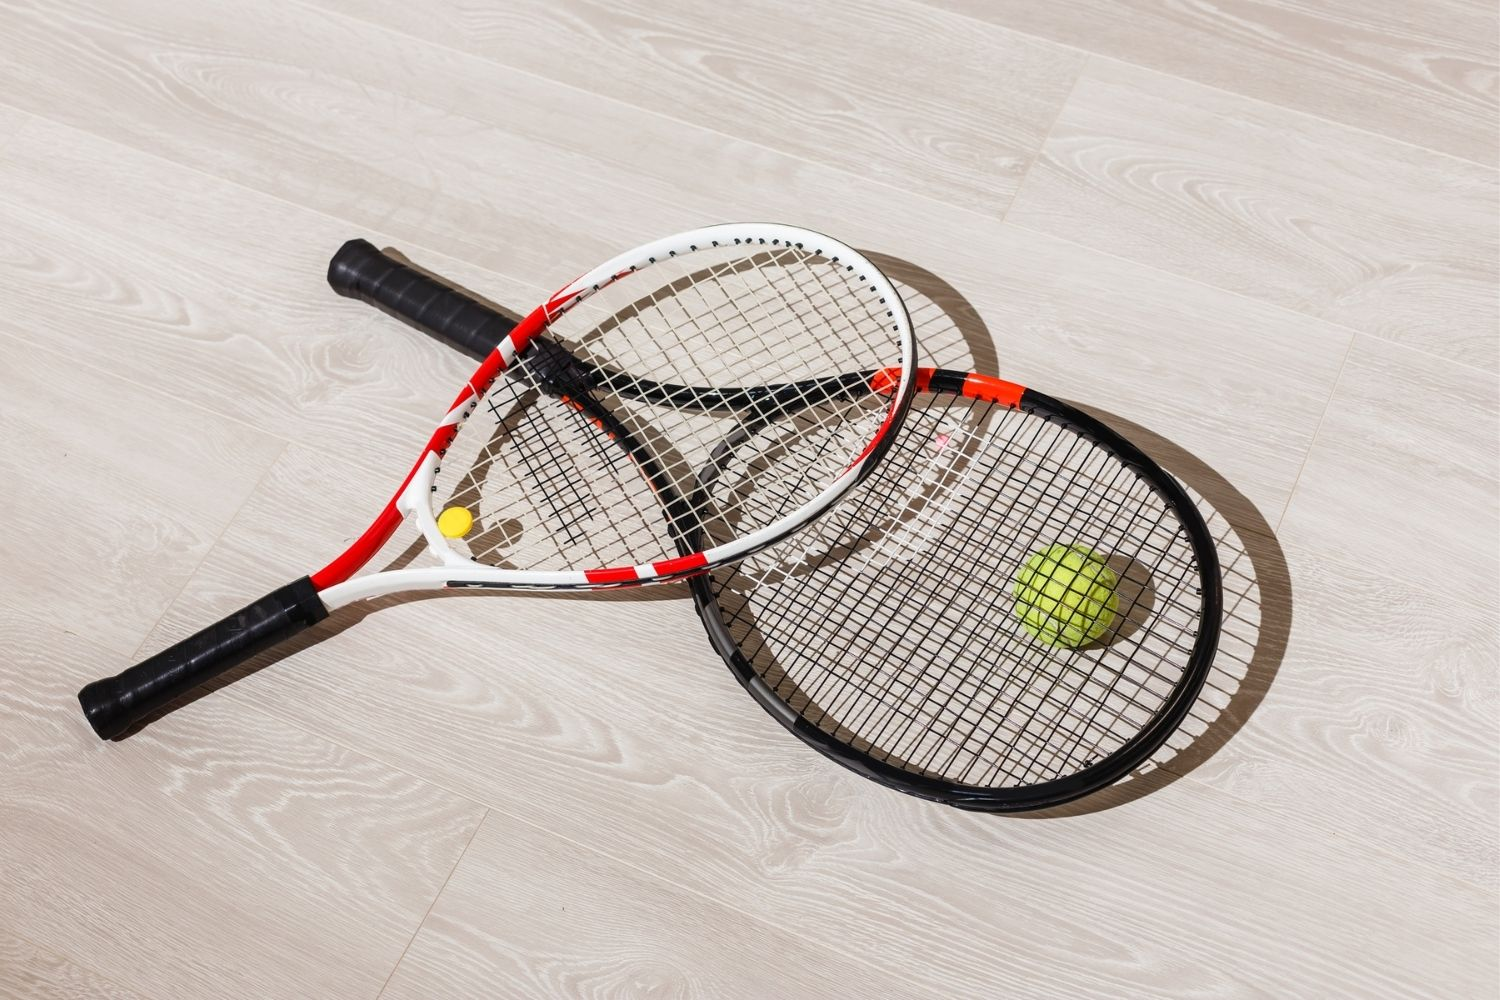 These Tennis Rackets Will Polish Your Playing Skills